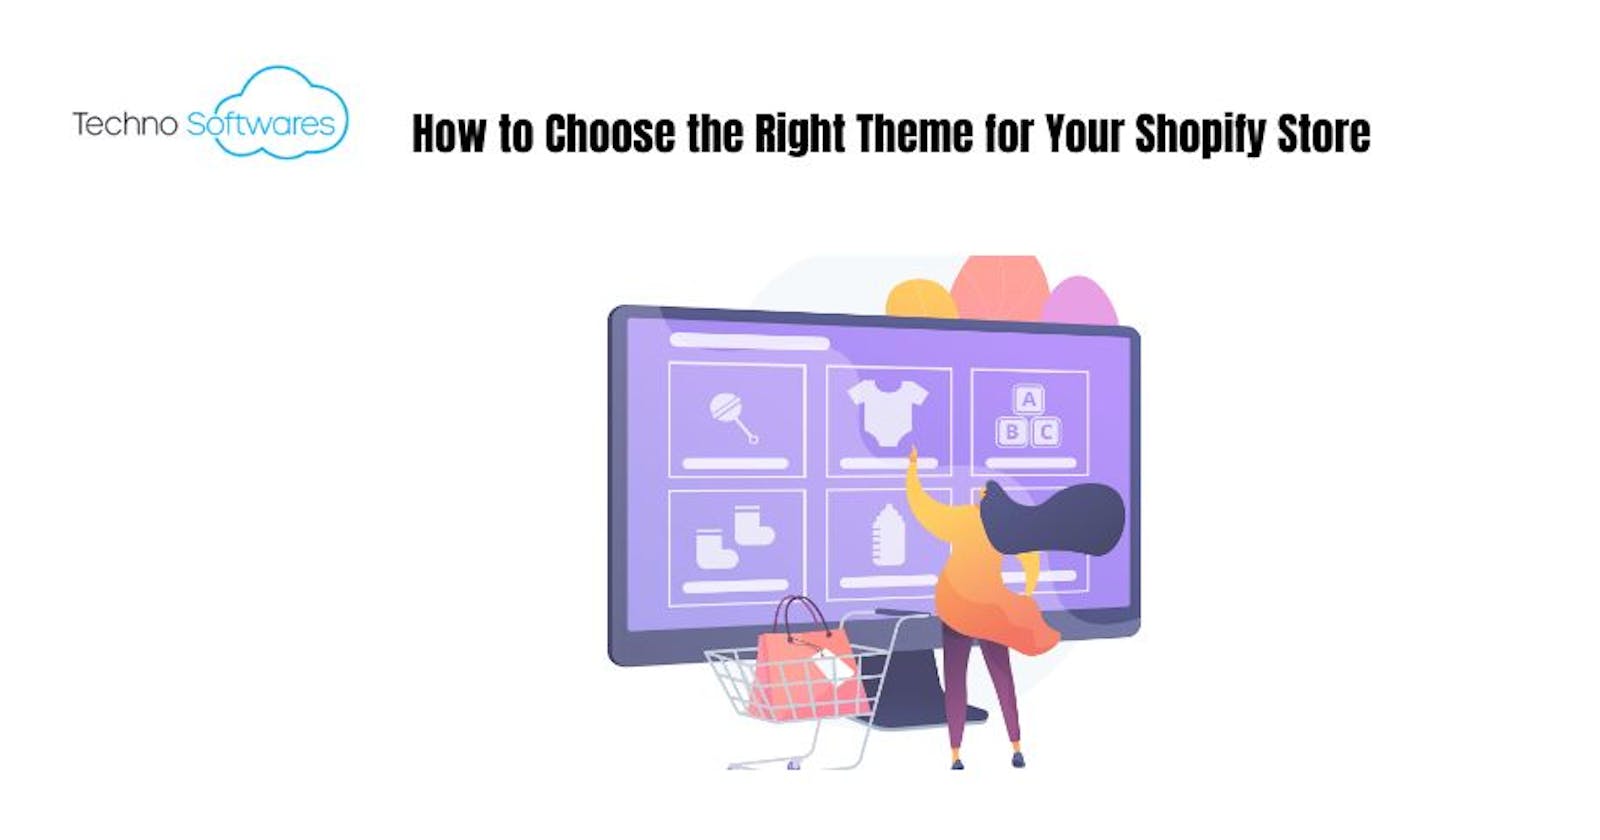 How to Choose the Right Theme for Your Shopify Store